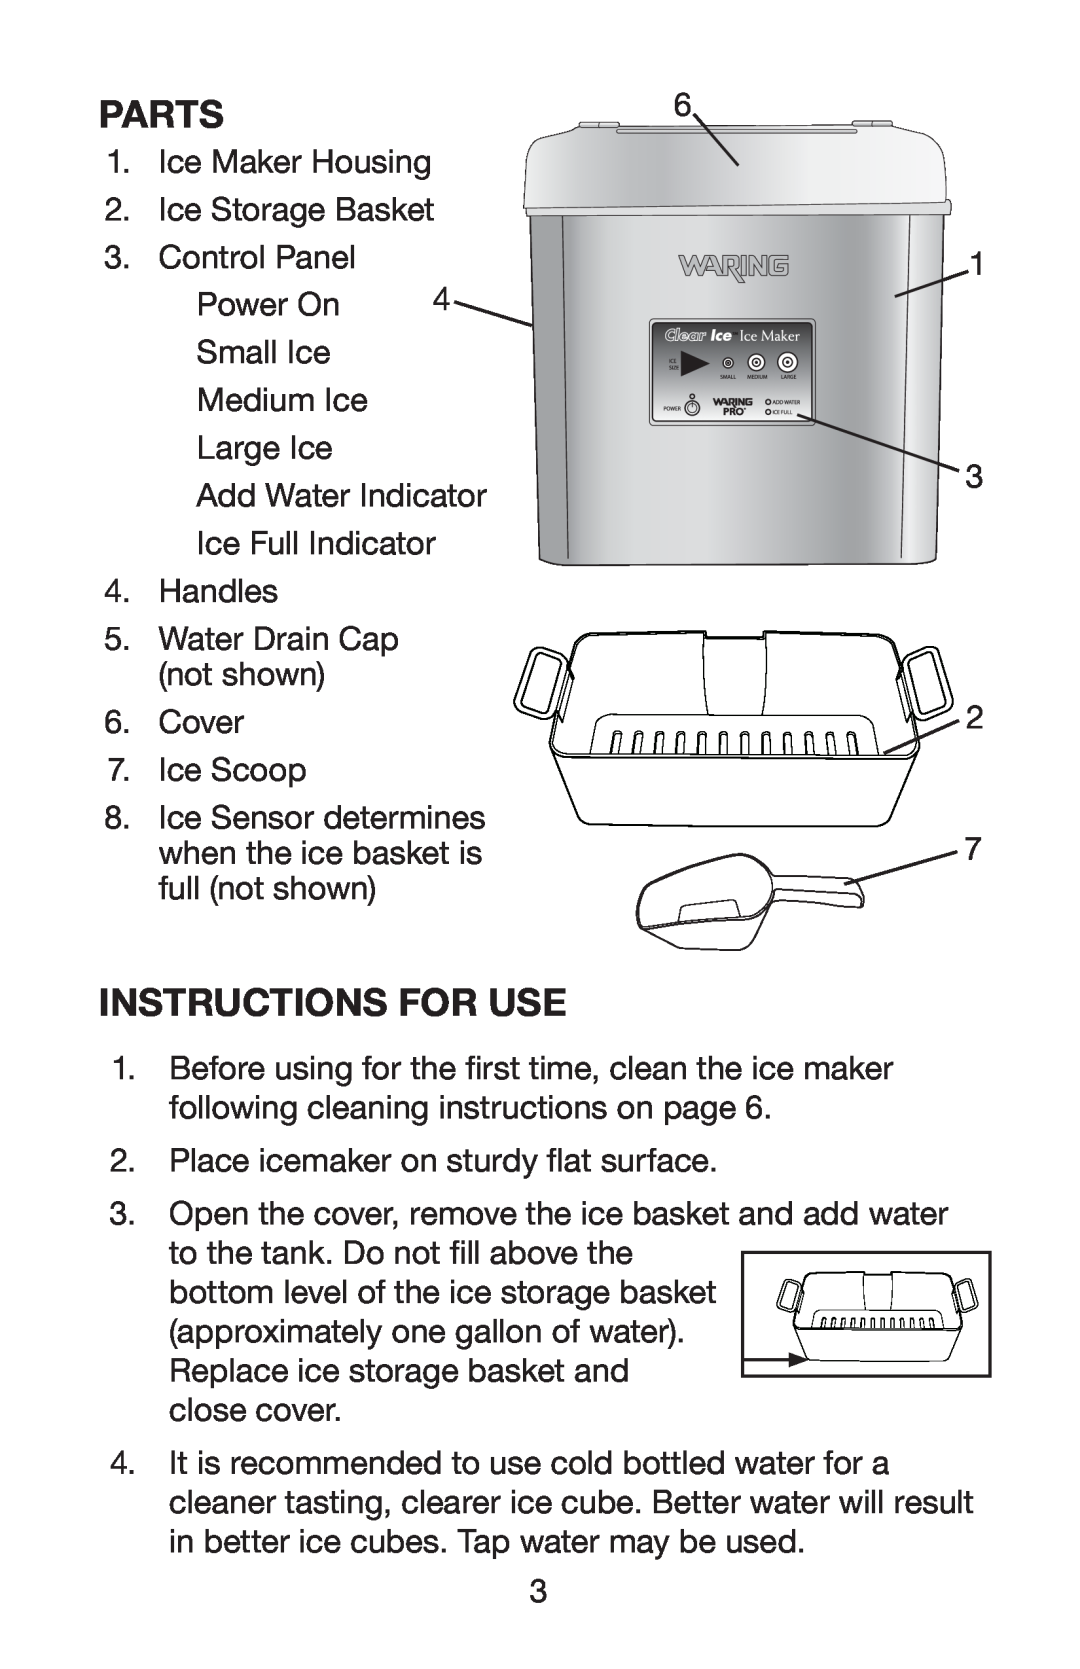 Waring WIM30 manual Parts6, Instructions for use 